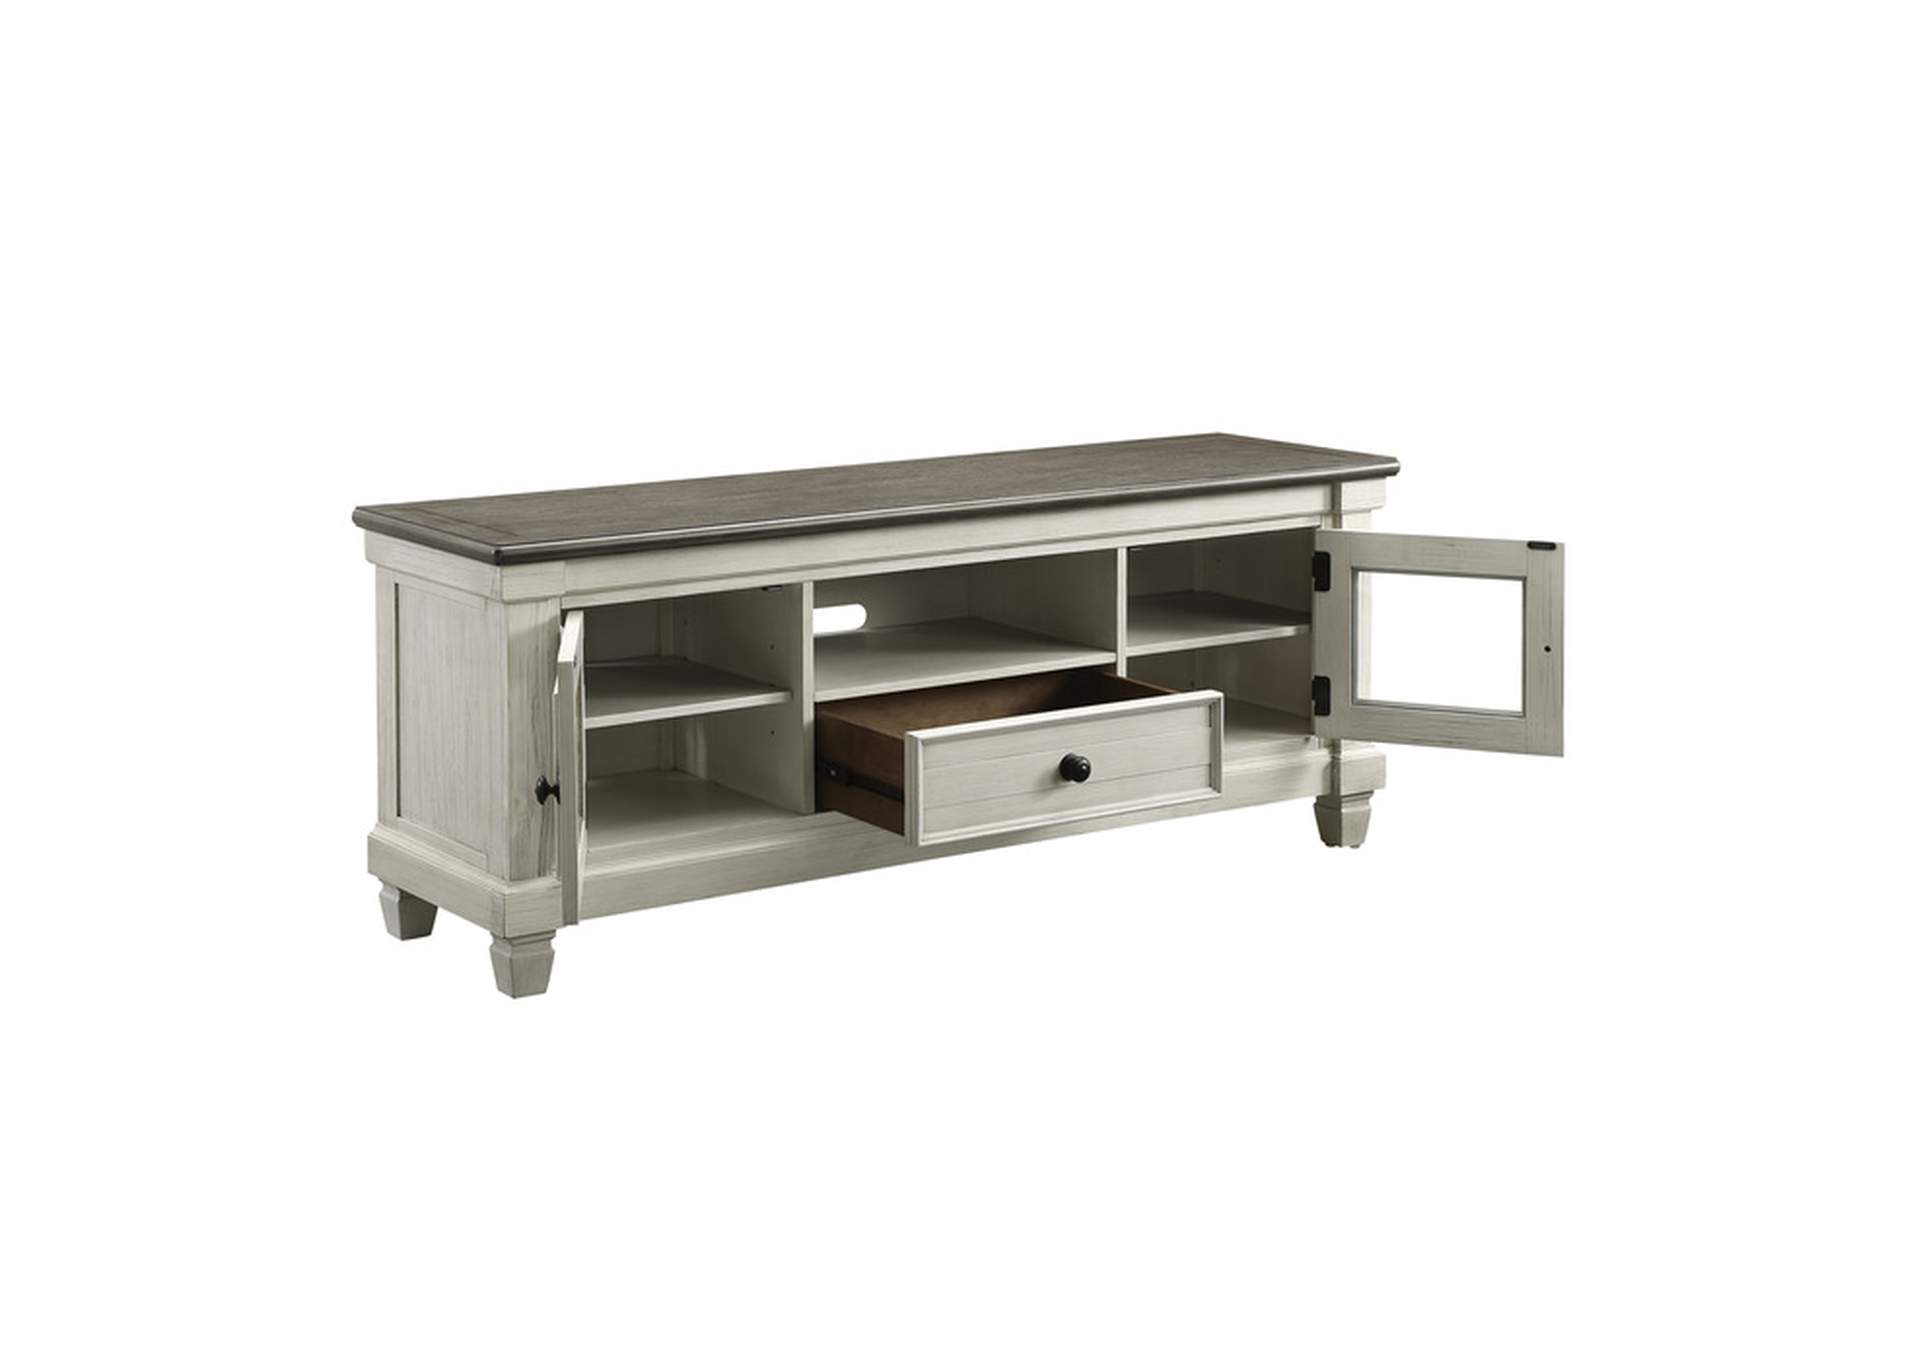 Granby TV Stand,Homelegance